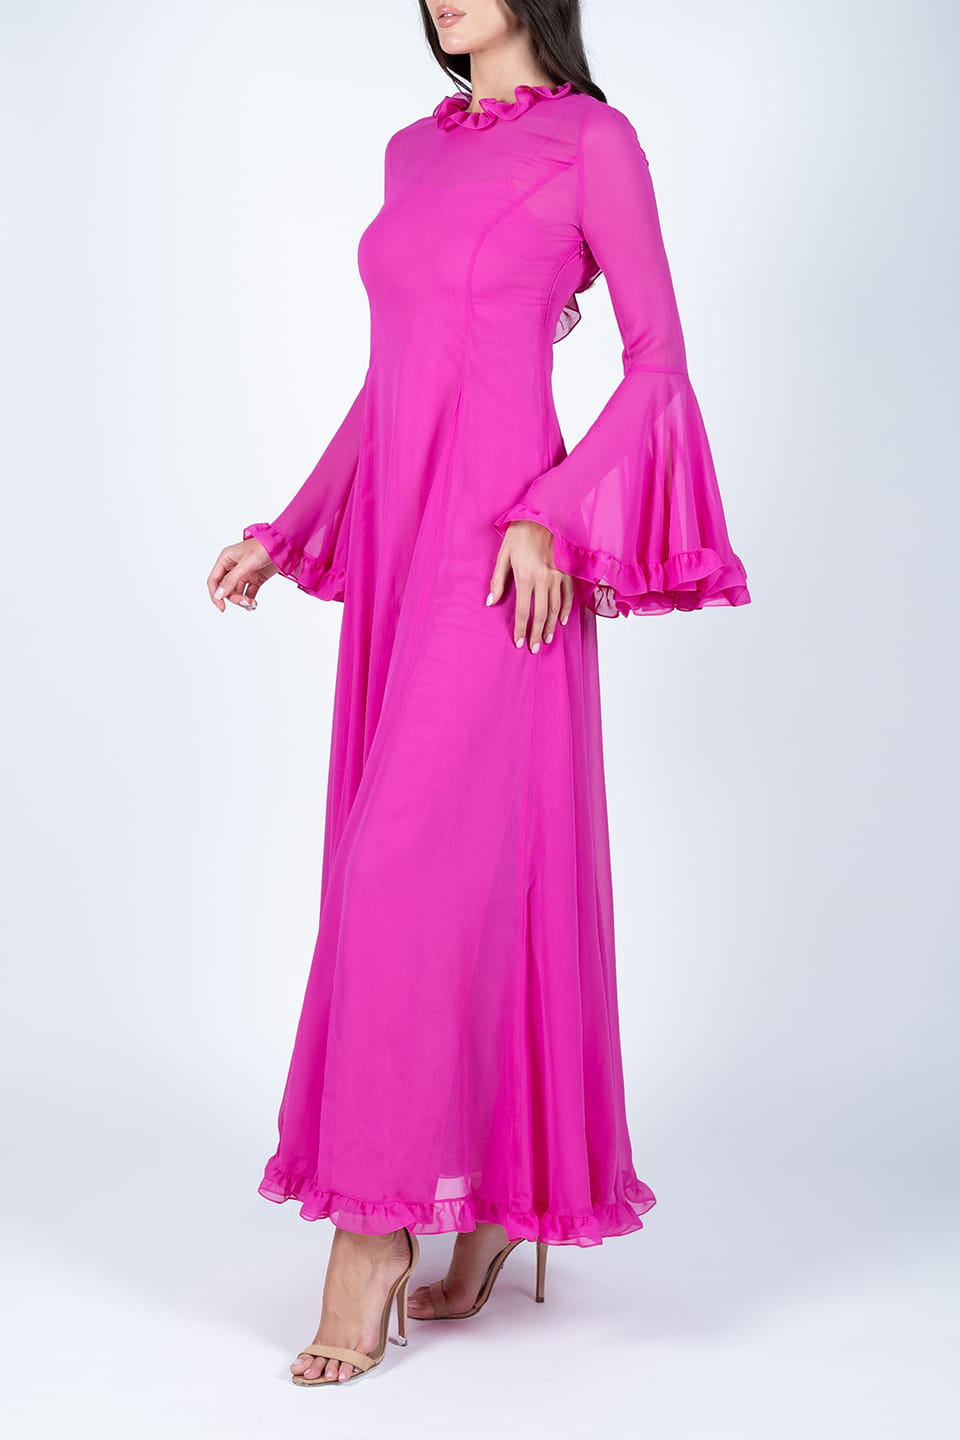 Thumbnail for Product gallery 3, Georgette Pink Long Dress